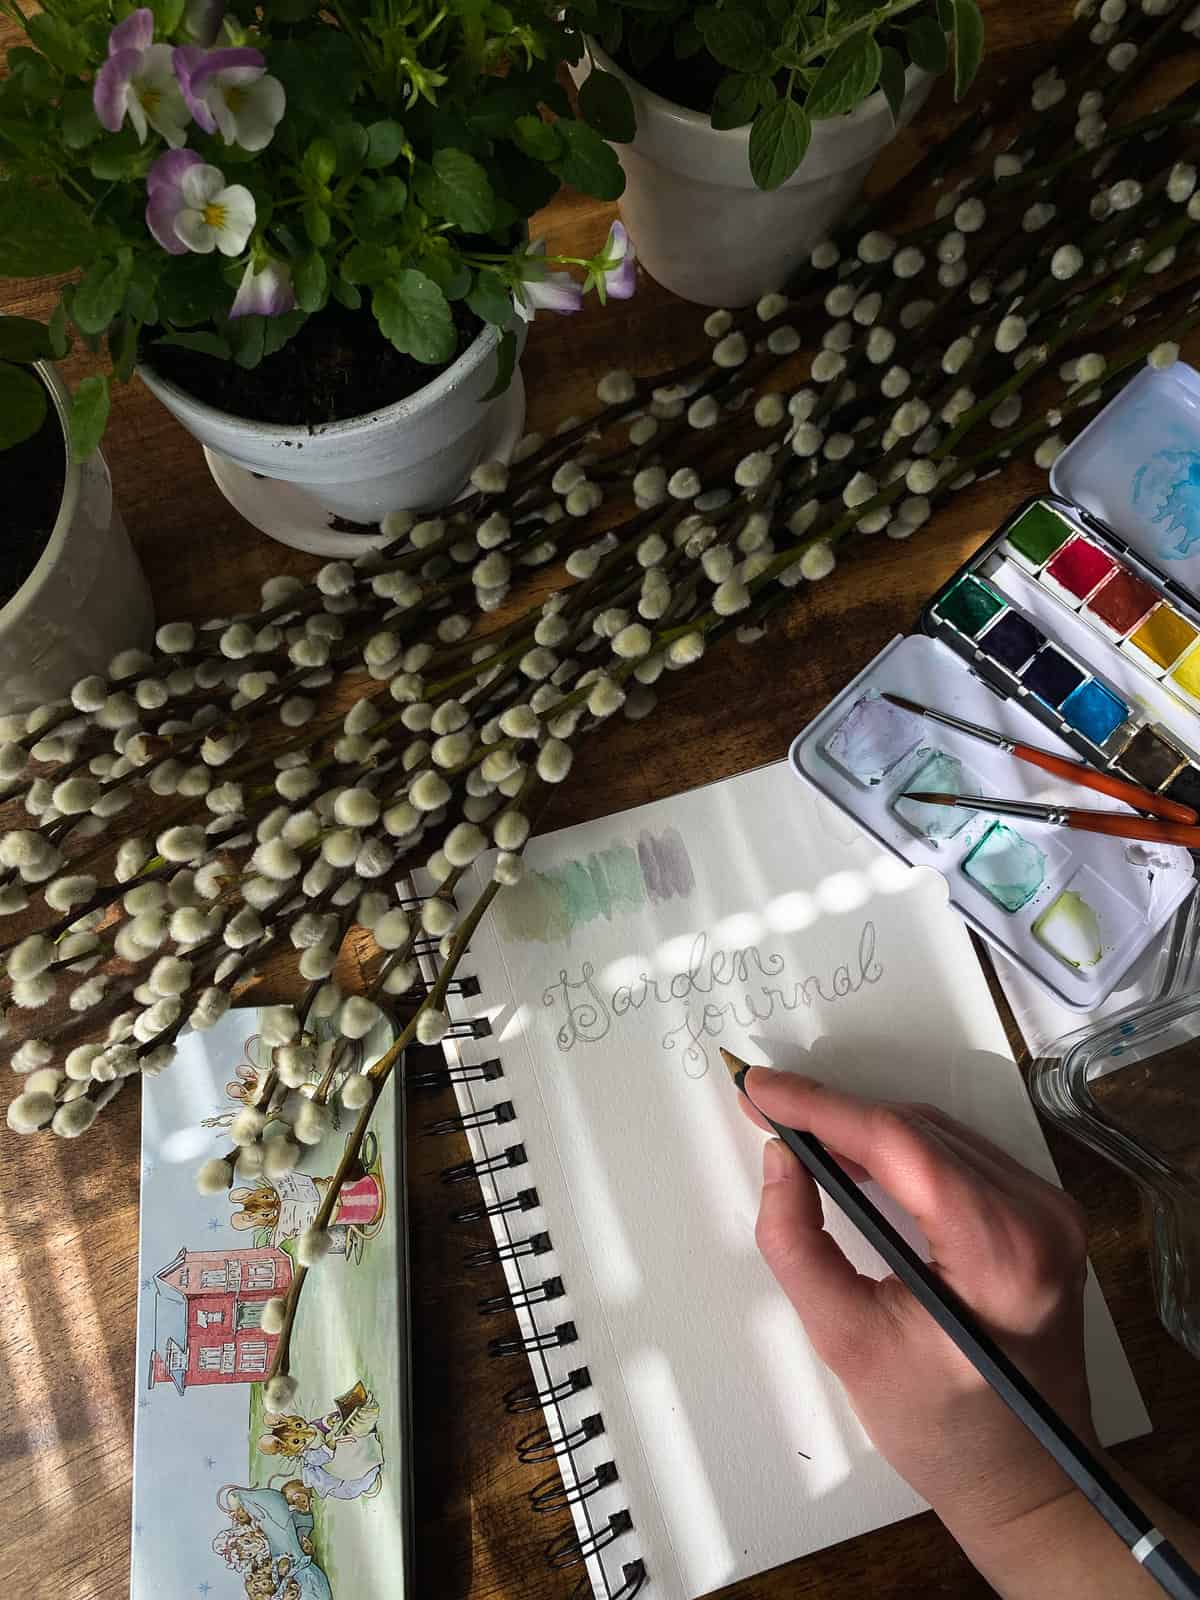 starting a garden journal with pencil and watercolors. theres pussy willow, plants, and art supplies all around